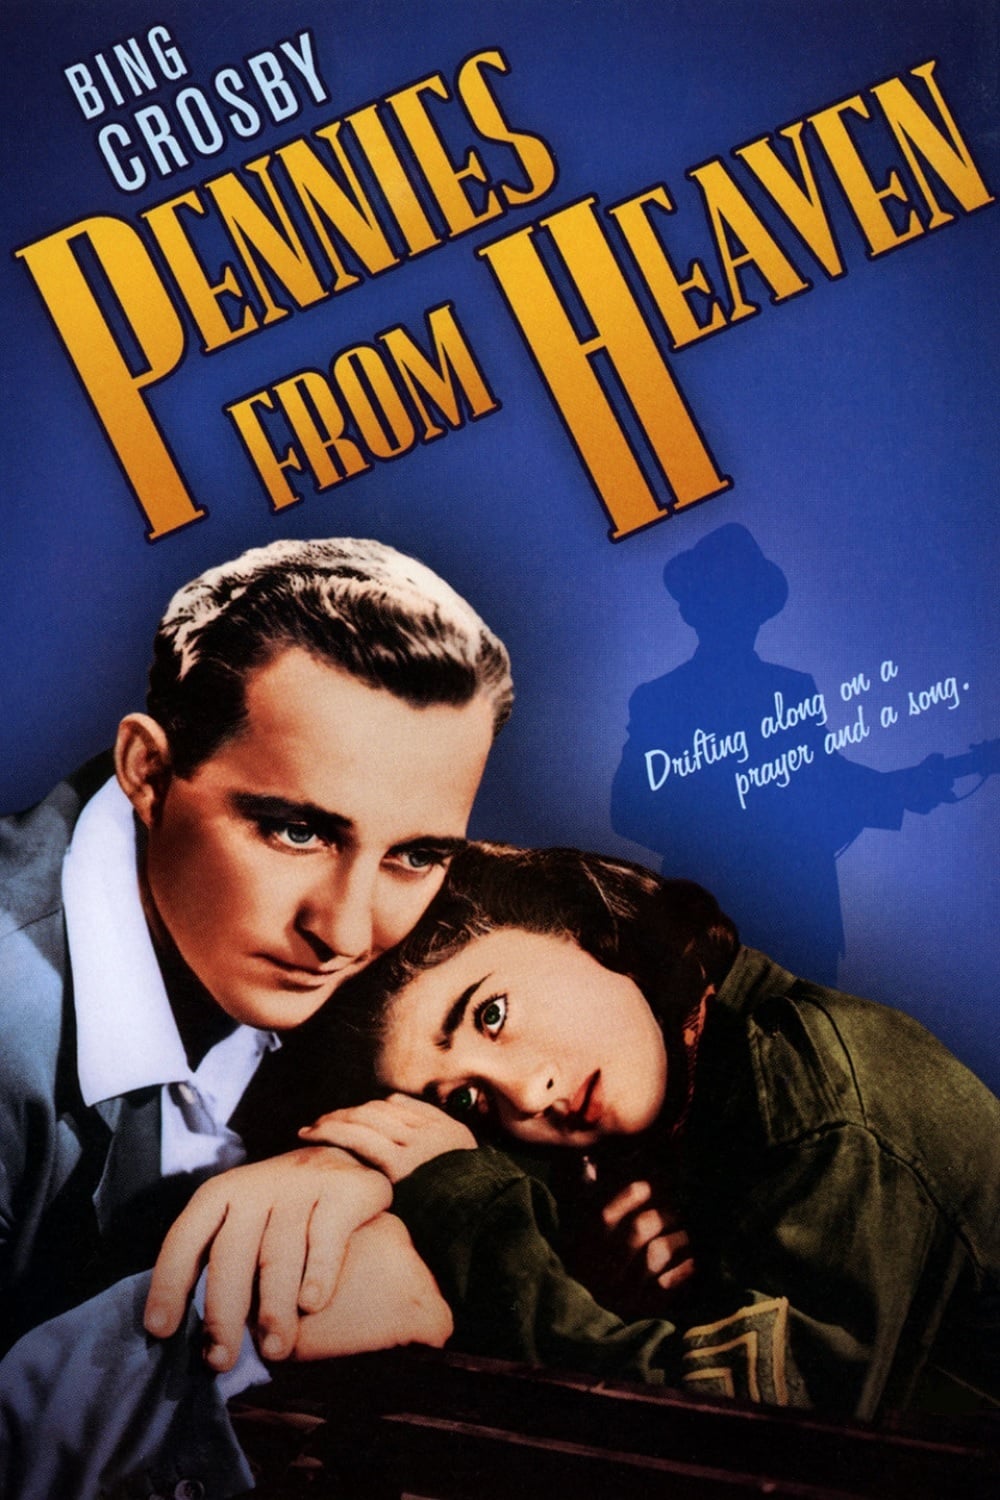 Poster for the movie "Pennies from Heaven"